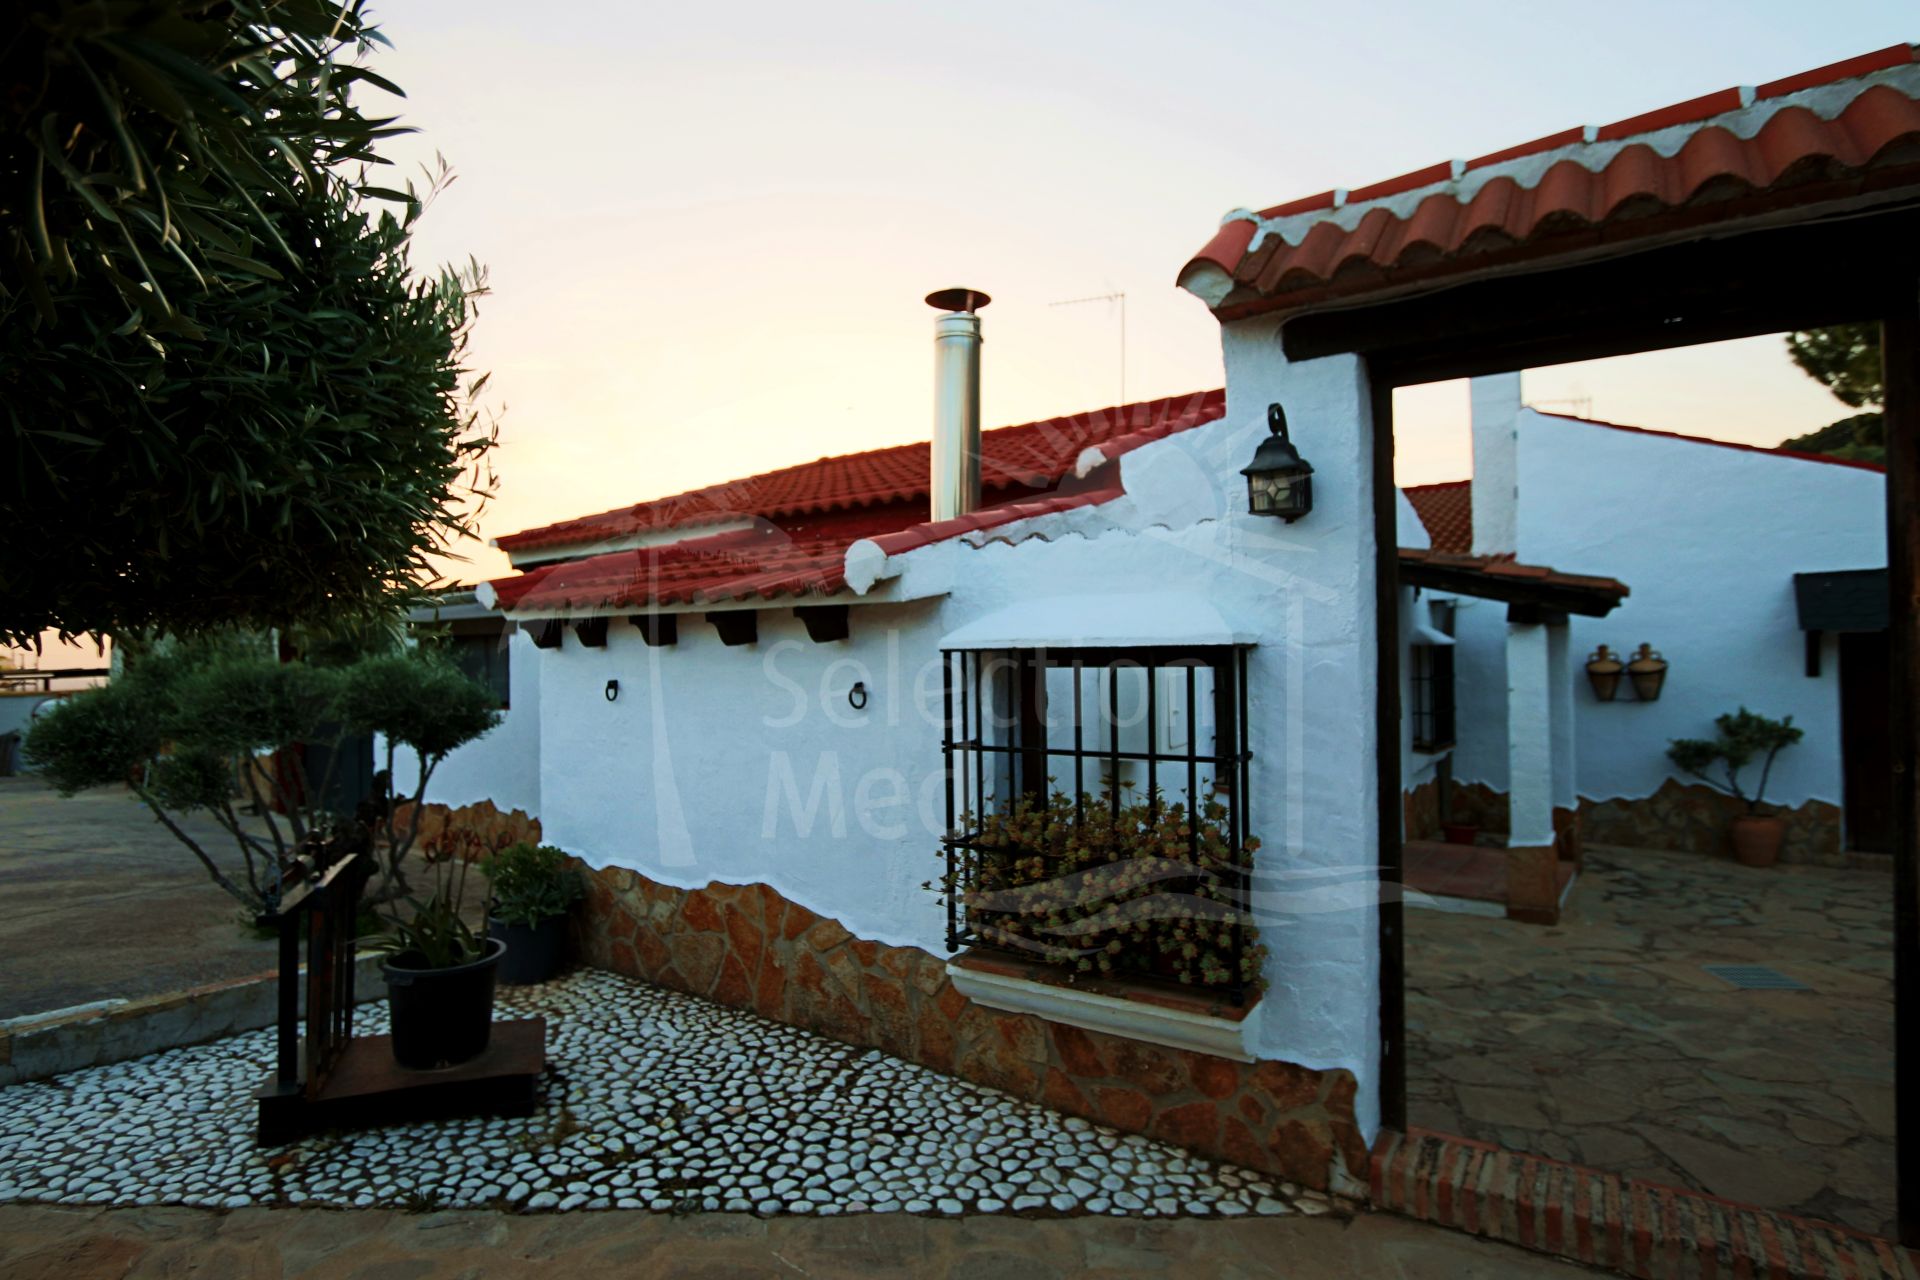 Spectacular house in Villanueva del trabuco with pool and great views